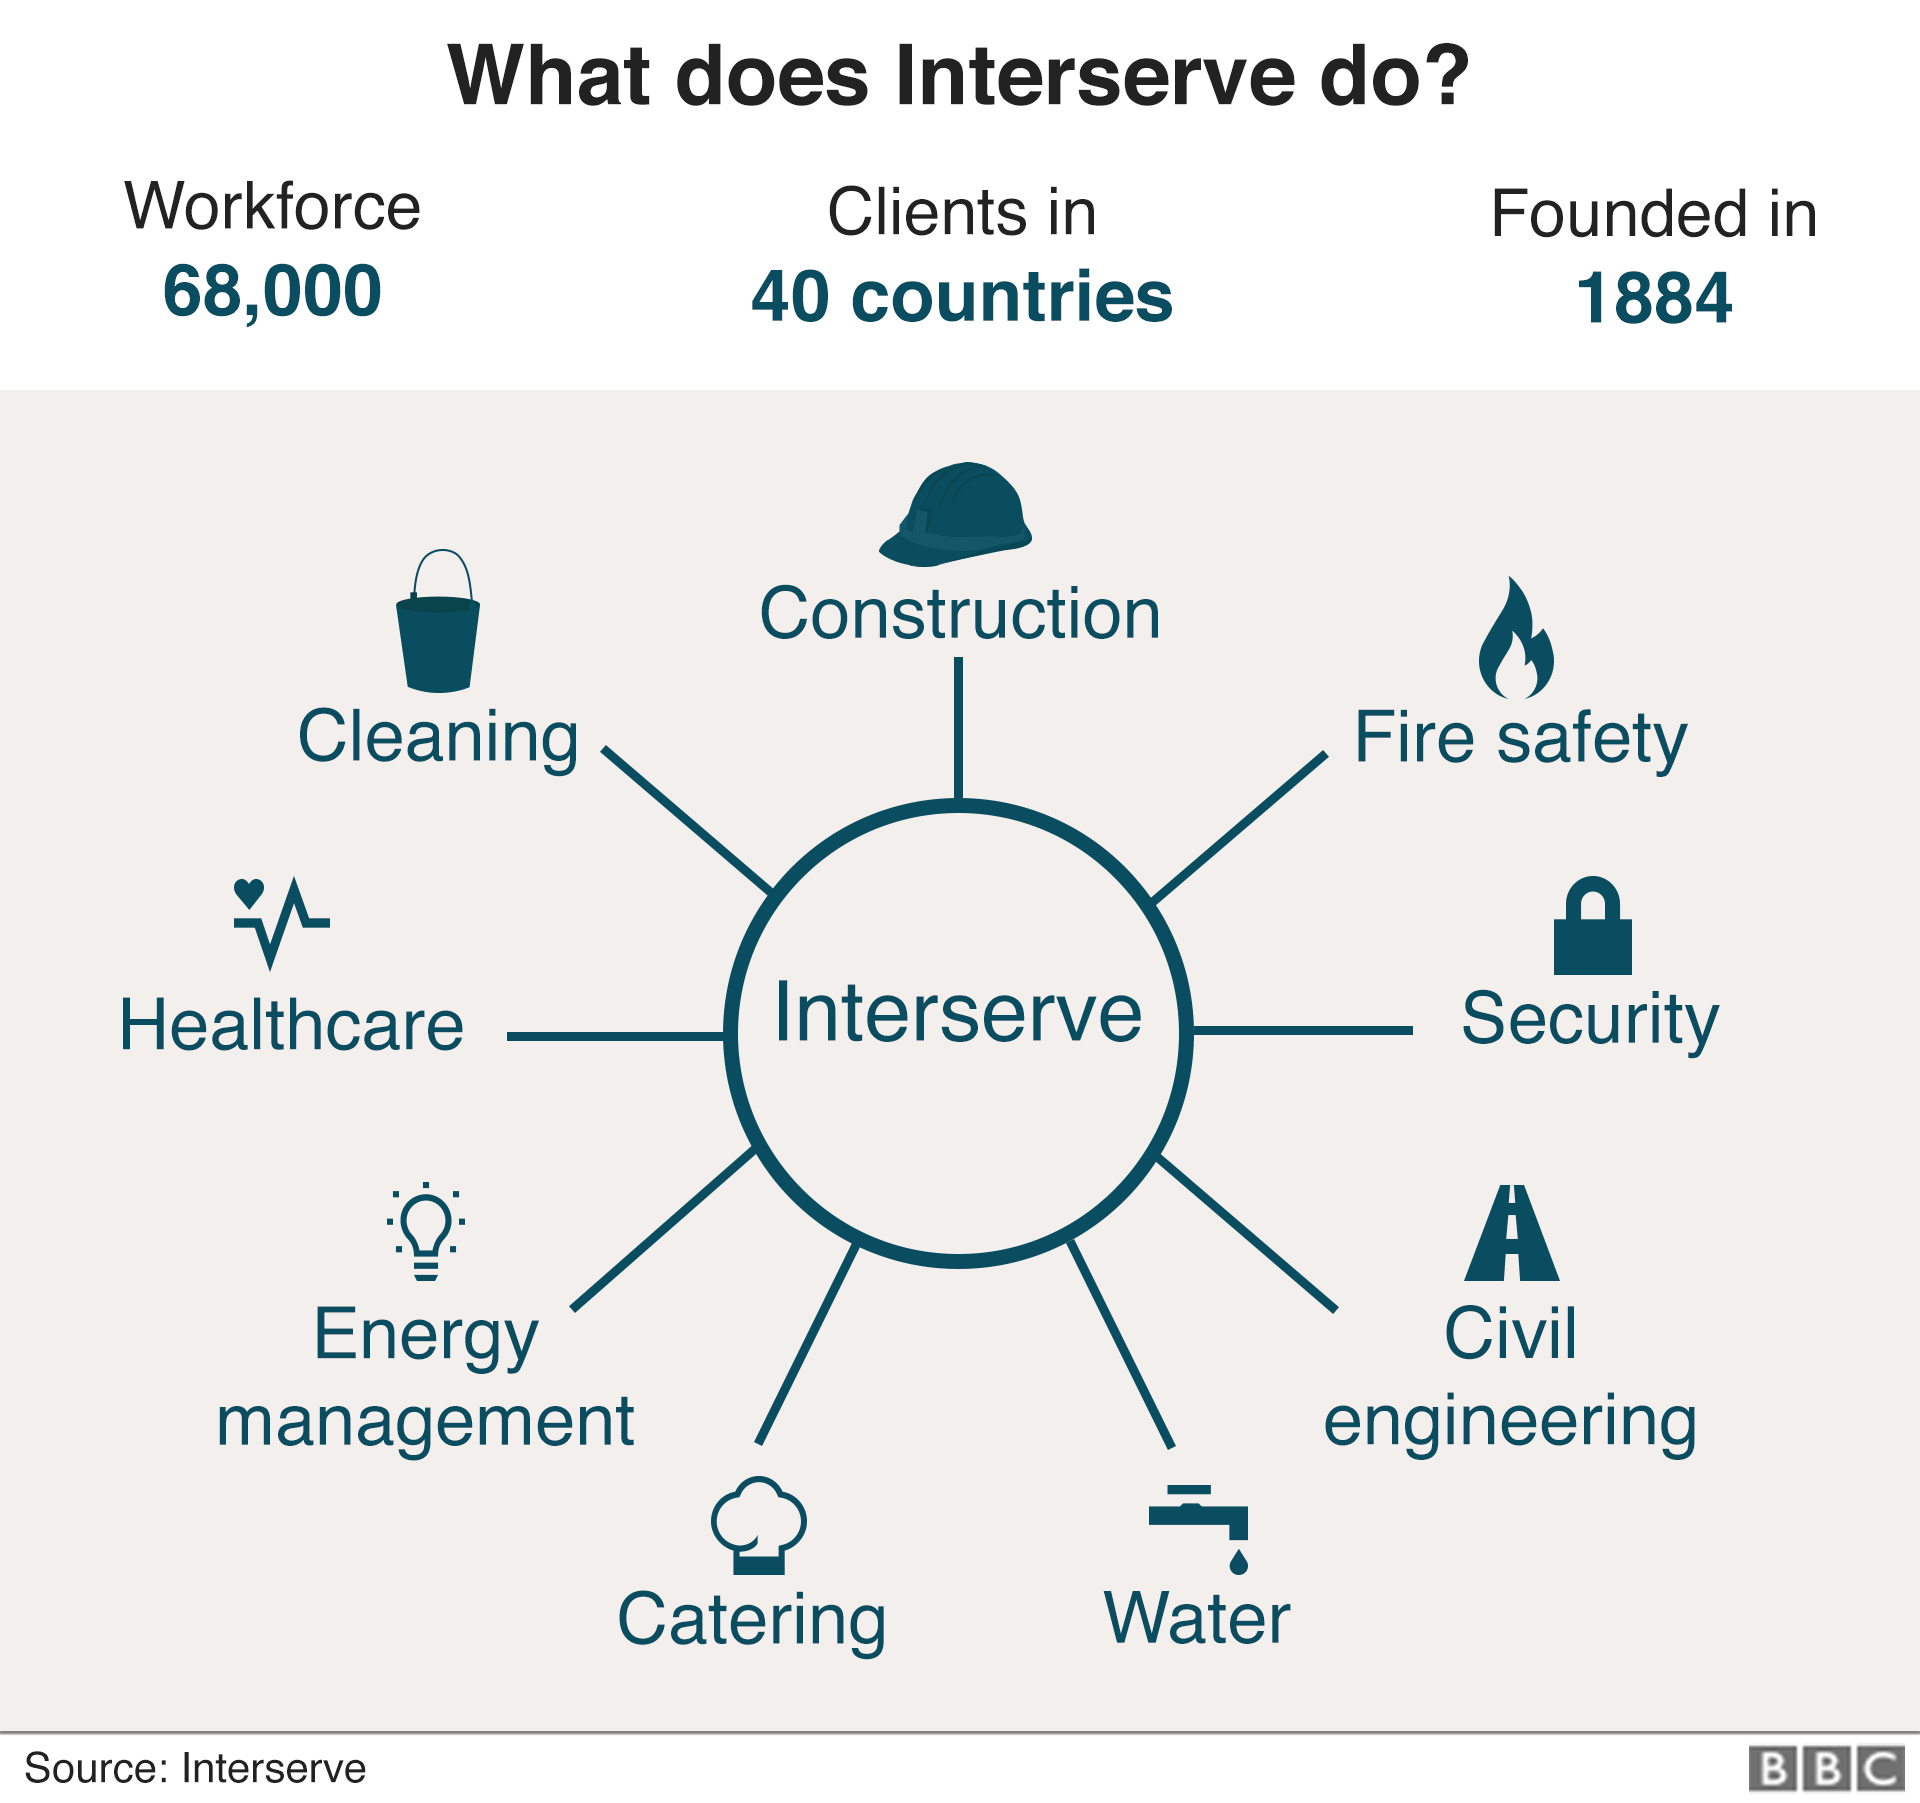 What does Interserve do?